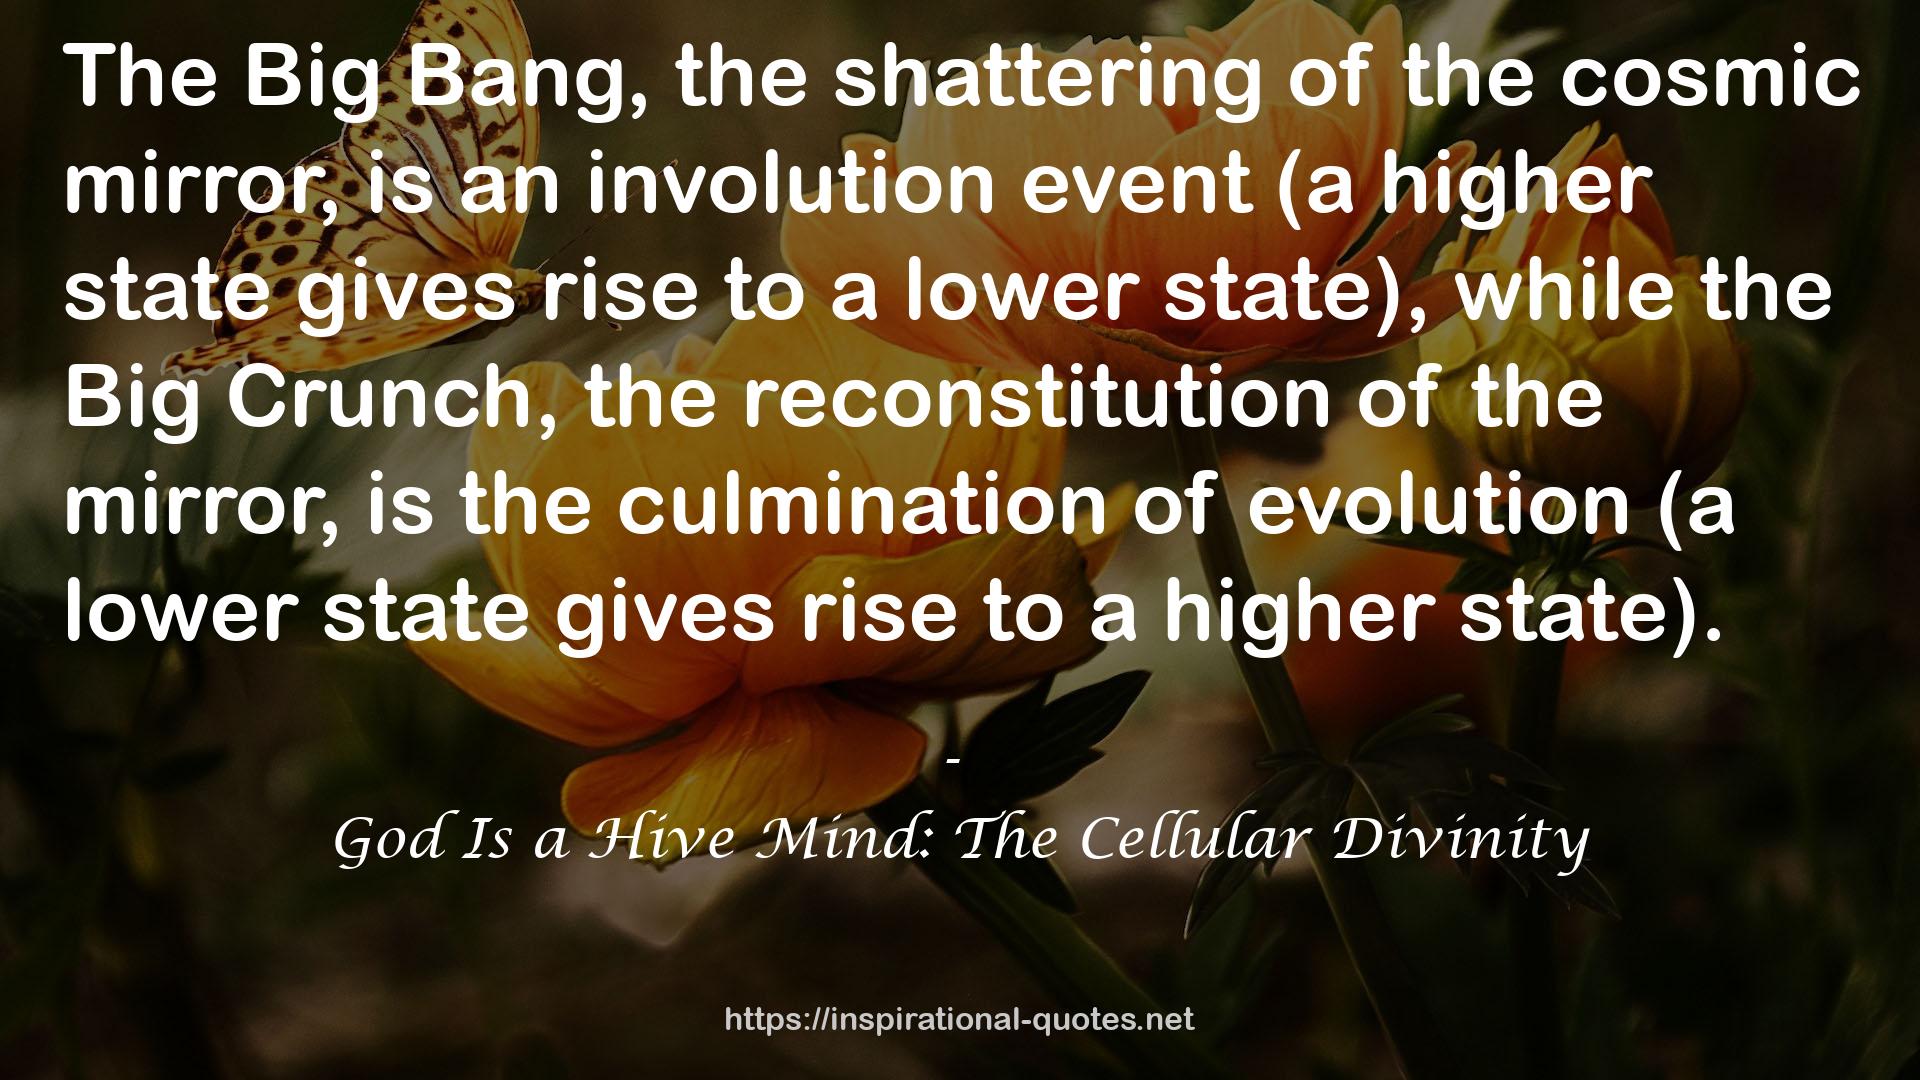 God Is a Hive Mind: The Cellular Divinity QUOTES